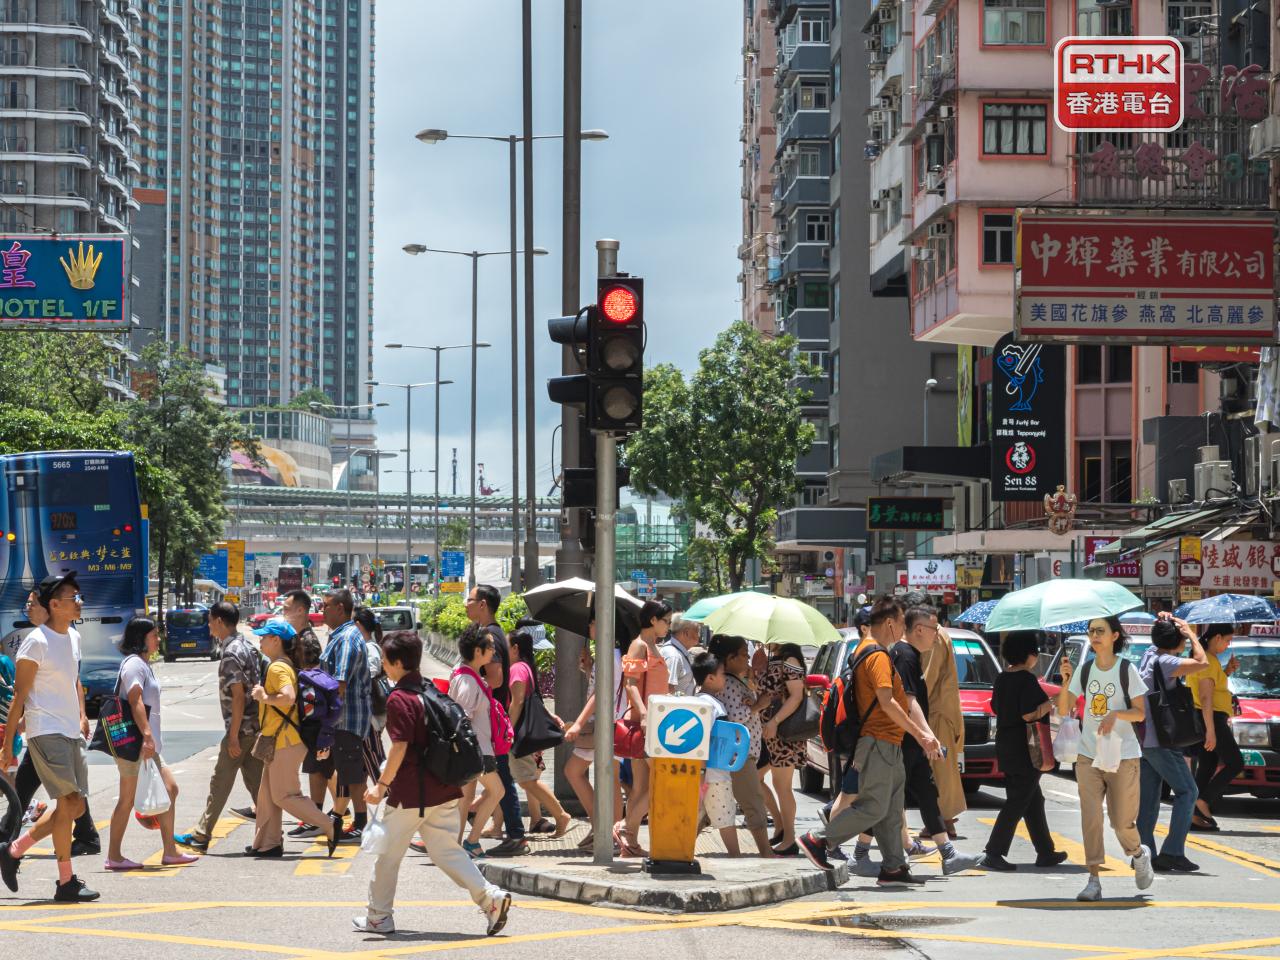 Hong Kong was unusually warm last month: observatory